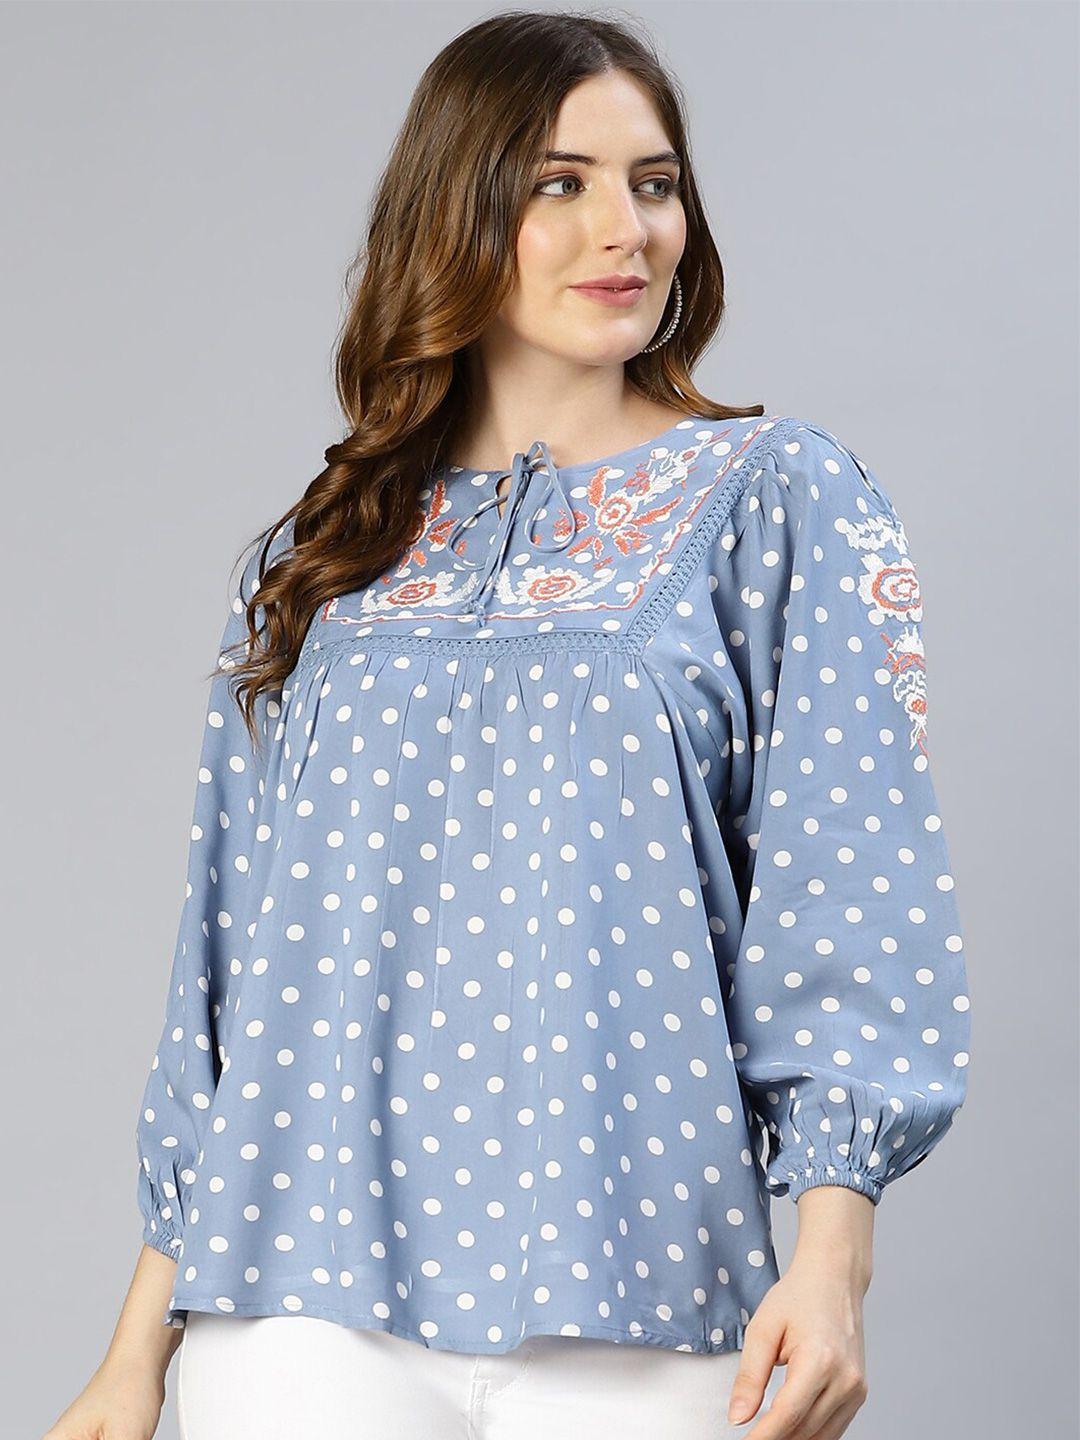 oxolloxo-women-blue-polka-dot-printed-tie-up-neck-top